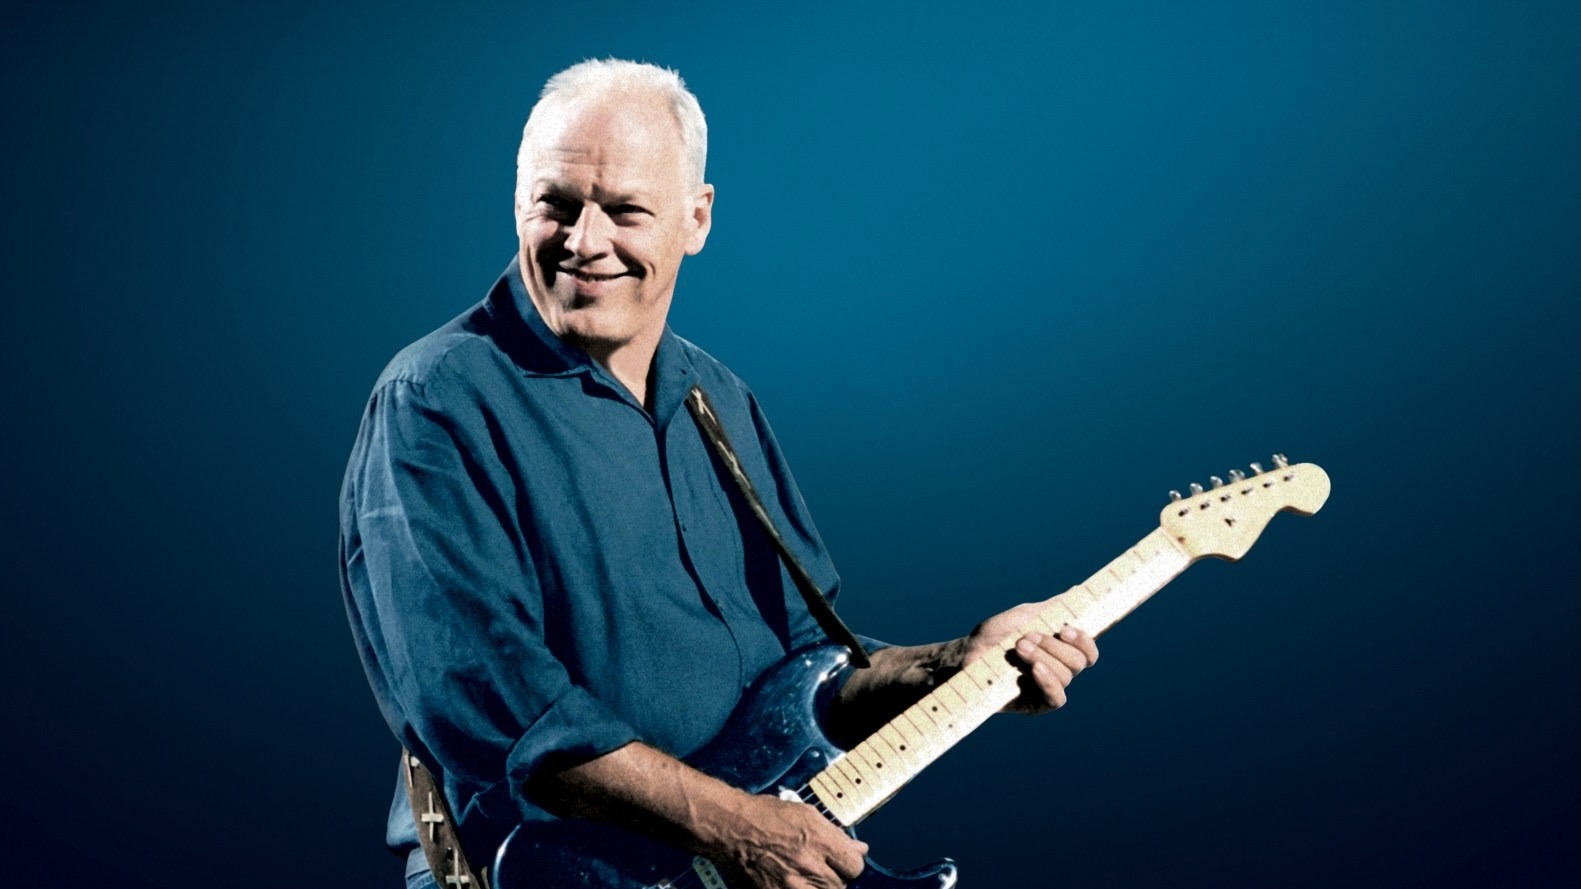 David Gilmour Is Open to a Pink Floyd Hologram Show, Under “Very Difficult and Onerous Conditions”